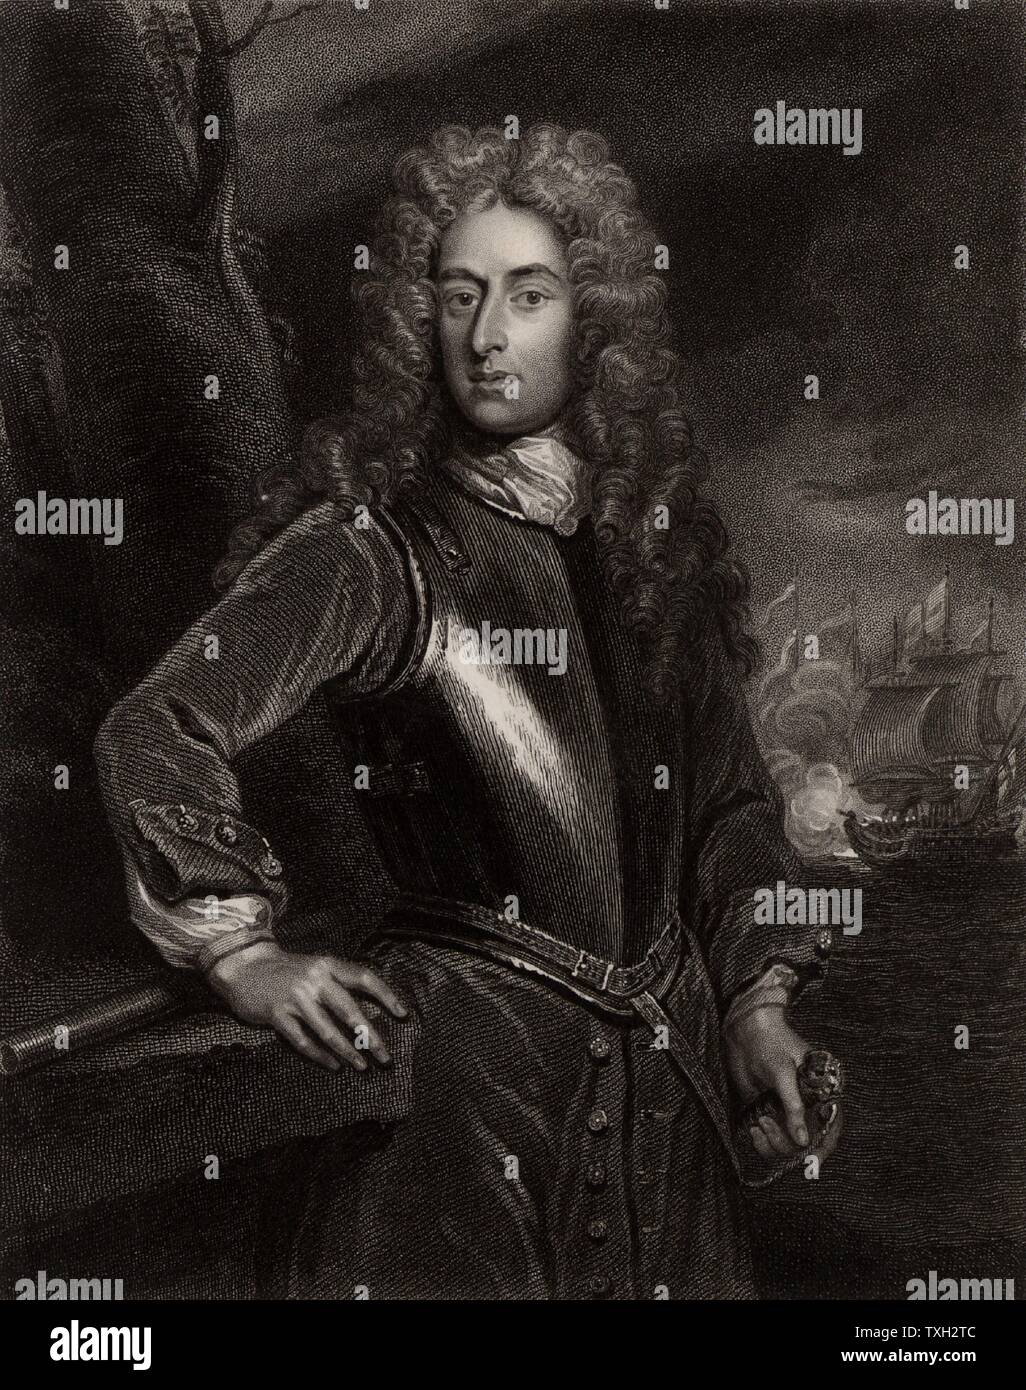 George Byng, lst Viscount Torrington (1663-1733) English naval commander: Admiral of the Fleet 1718.  First Lord of the Admiralty from 1727. Engraving after portrait by Godfrey Kneller. Stock Photo